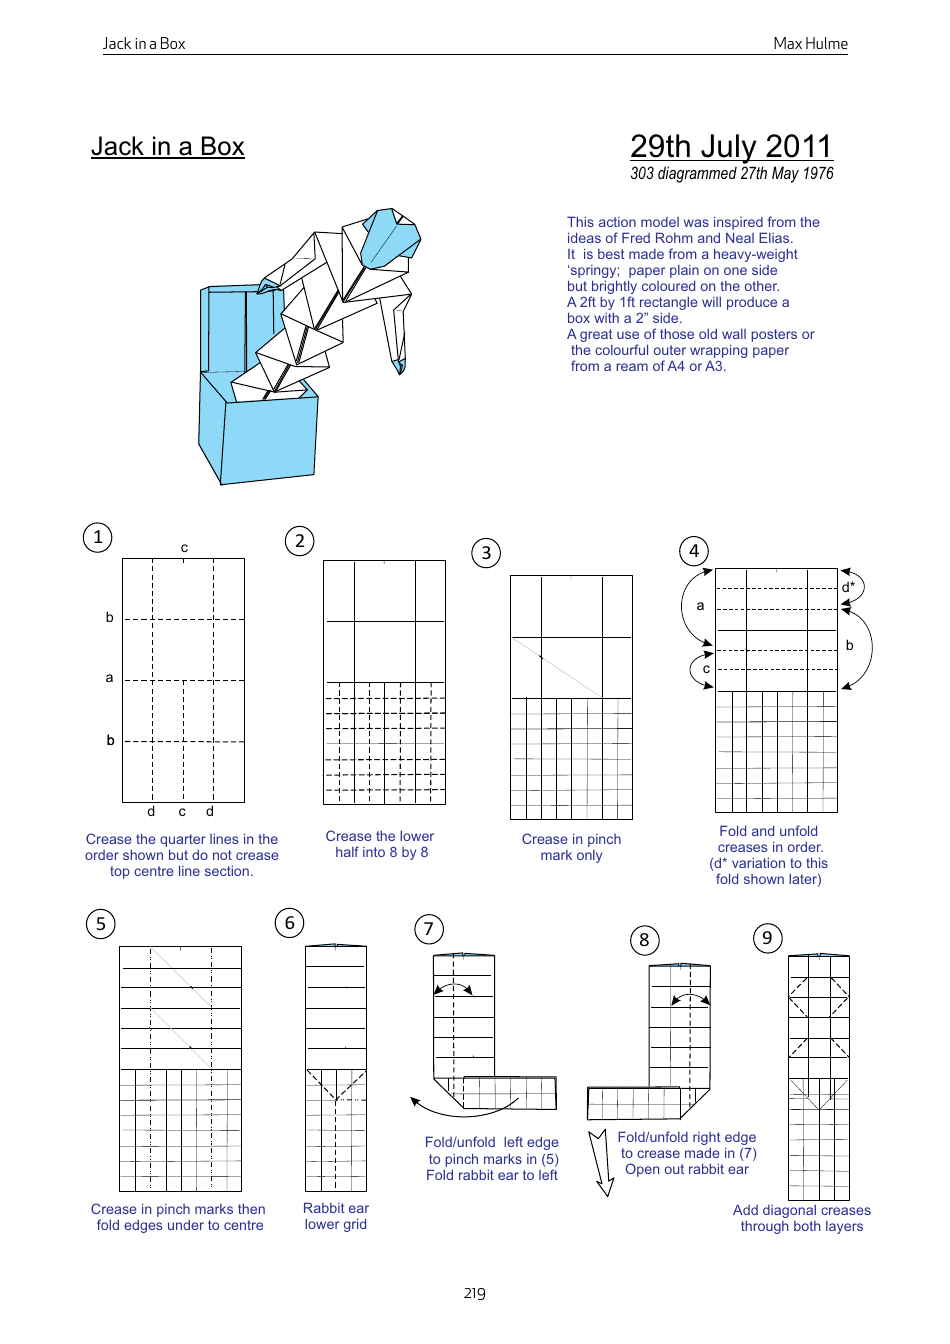 Origami Paper Jack in a Box Guide - Preview Image